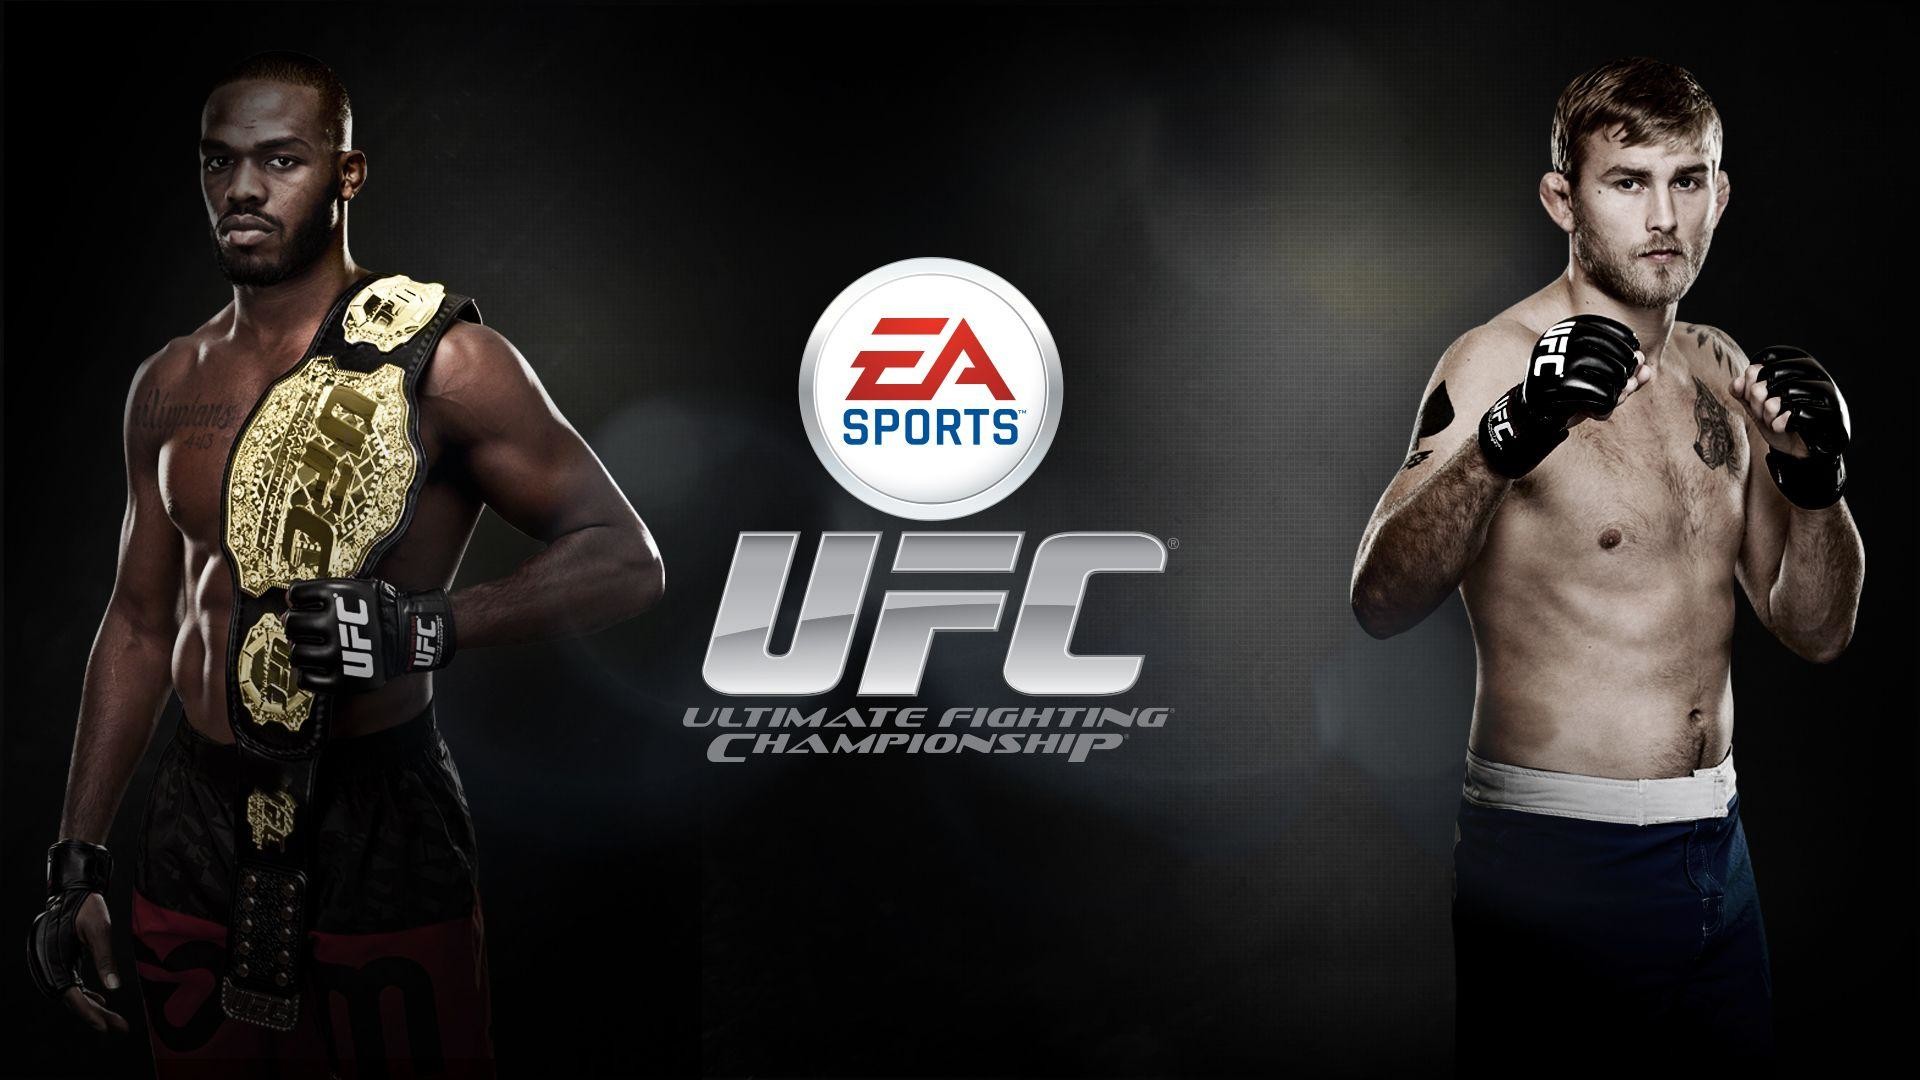 1920x1080 Download Free Ufc Wallpapers HD | Wallpapers, Backgrounds, Images .